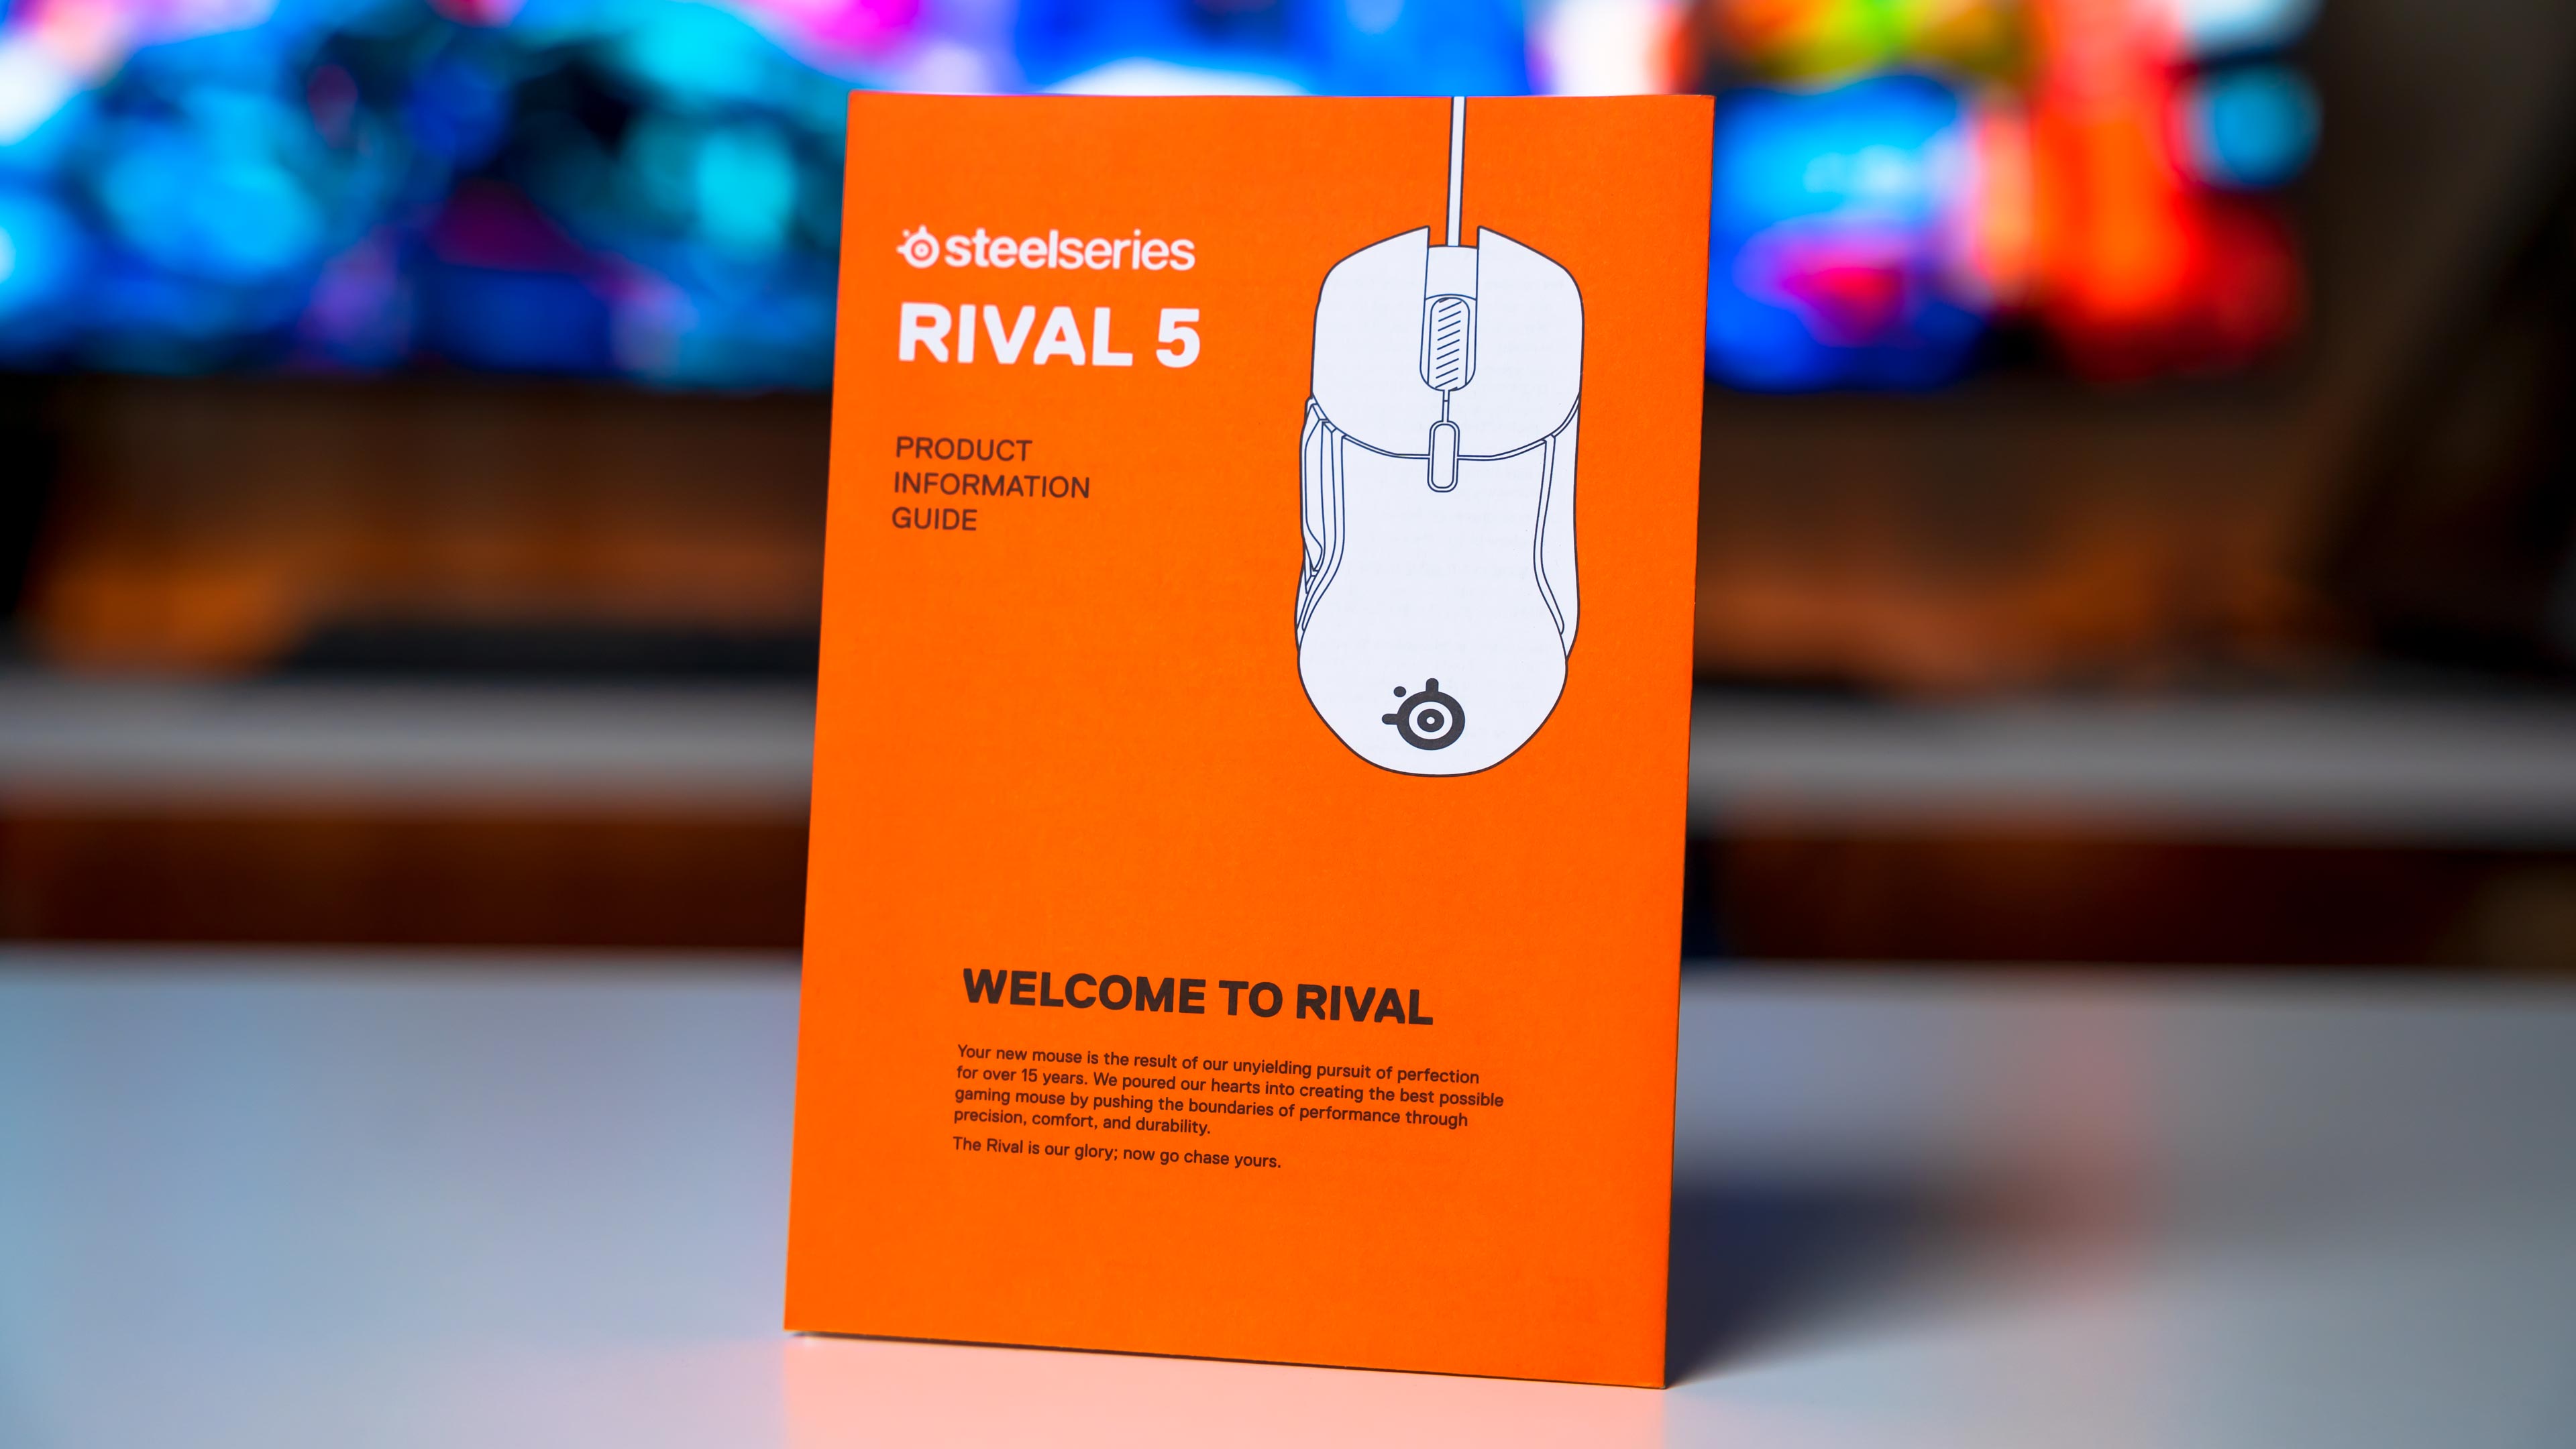 Steelseries Rival 5 Box (2)